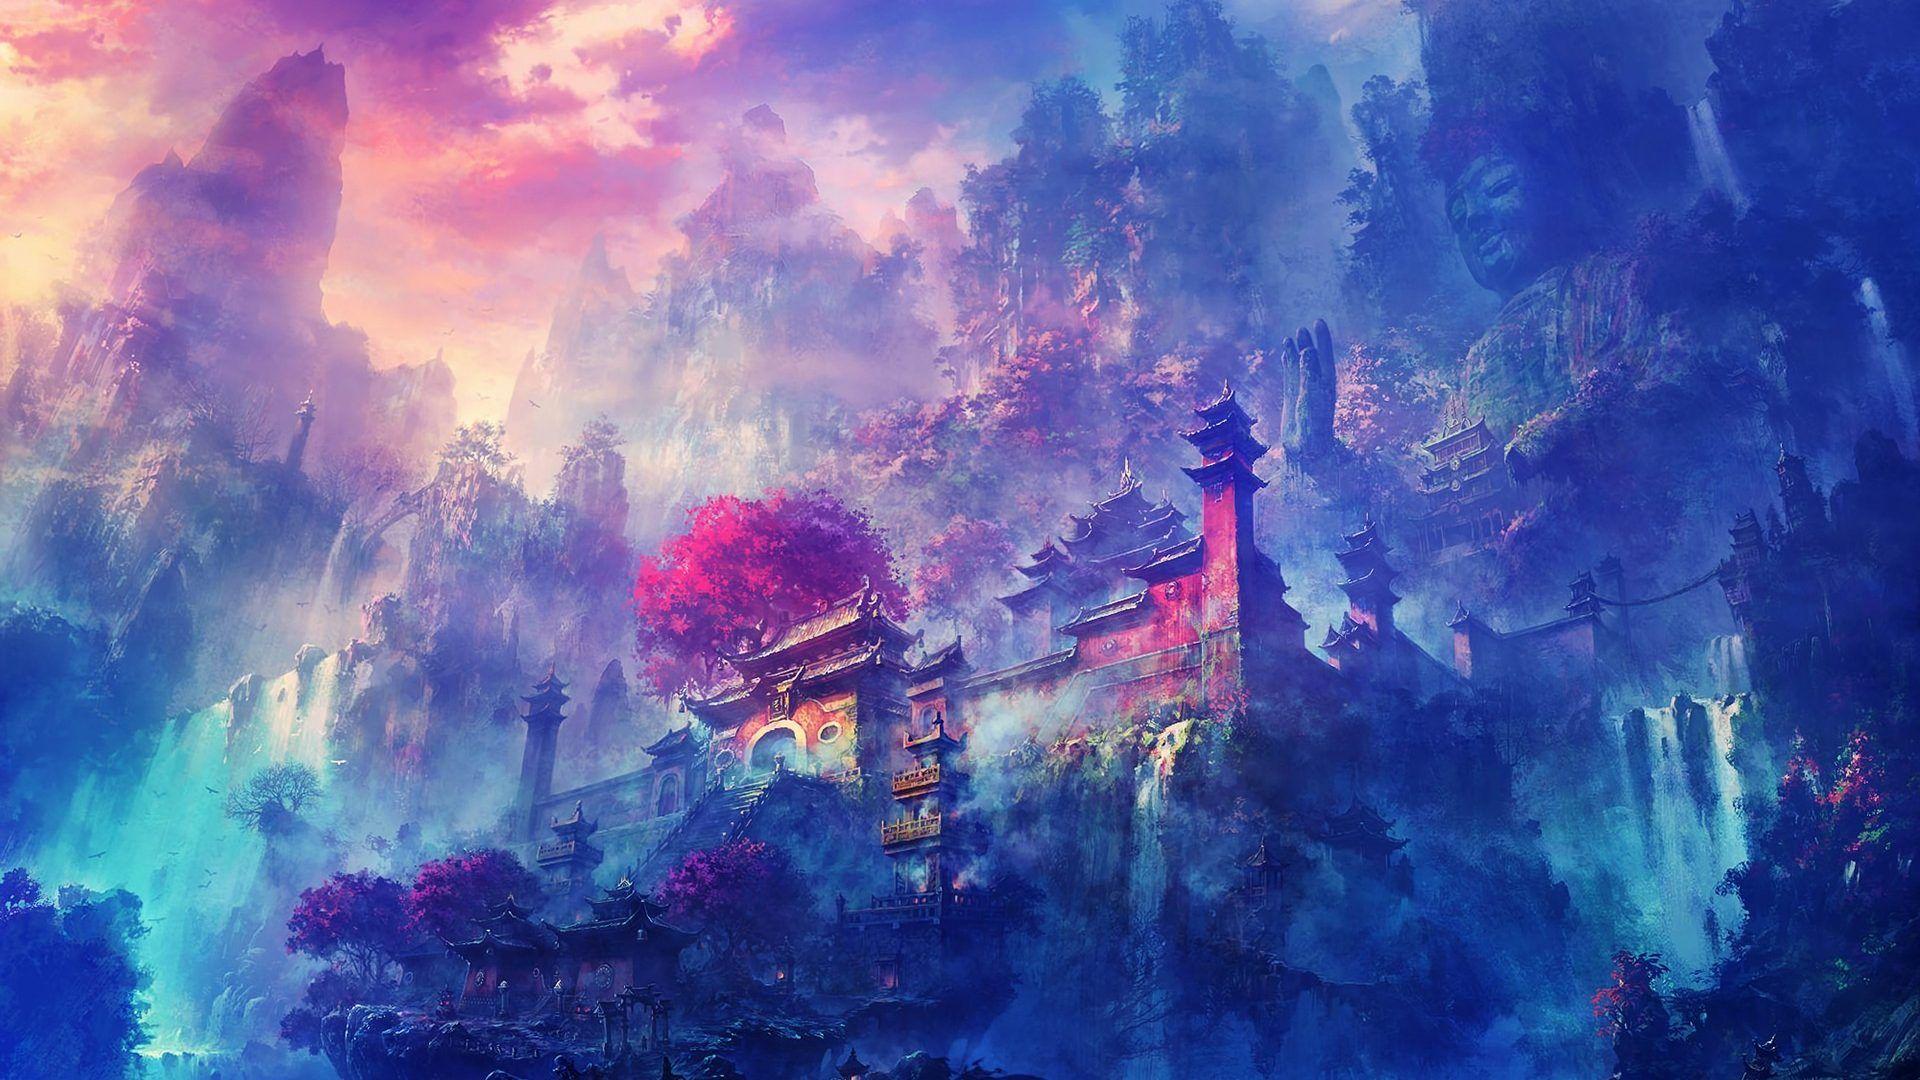 Purple Anime Scenery Wallpapers - Wallpaper Cave